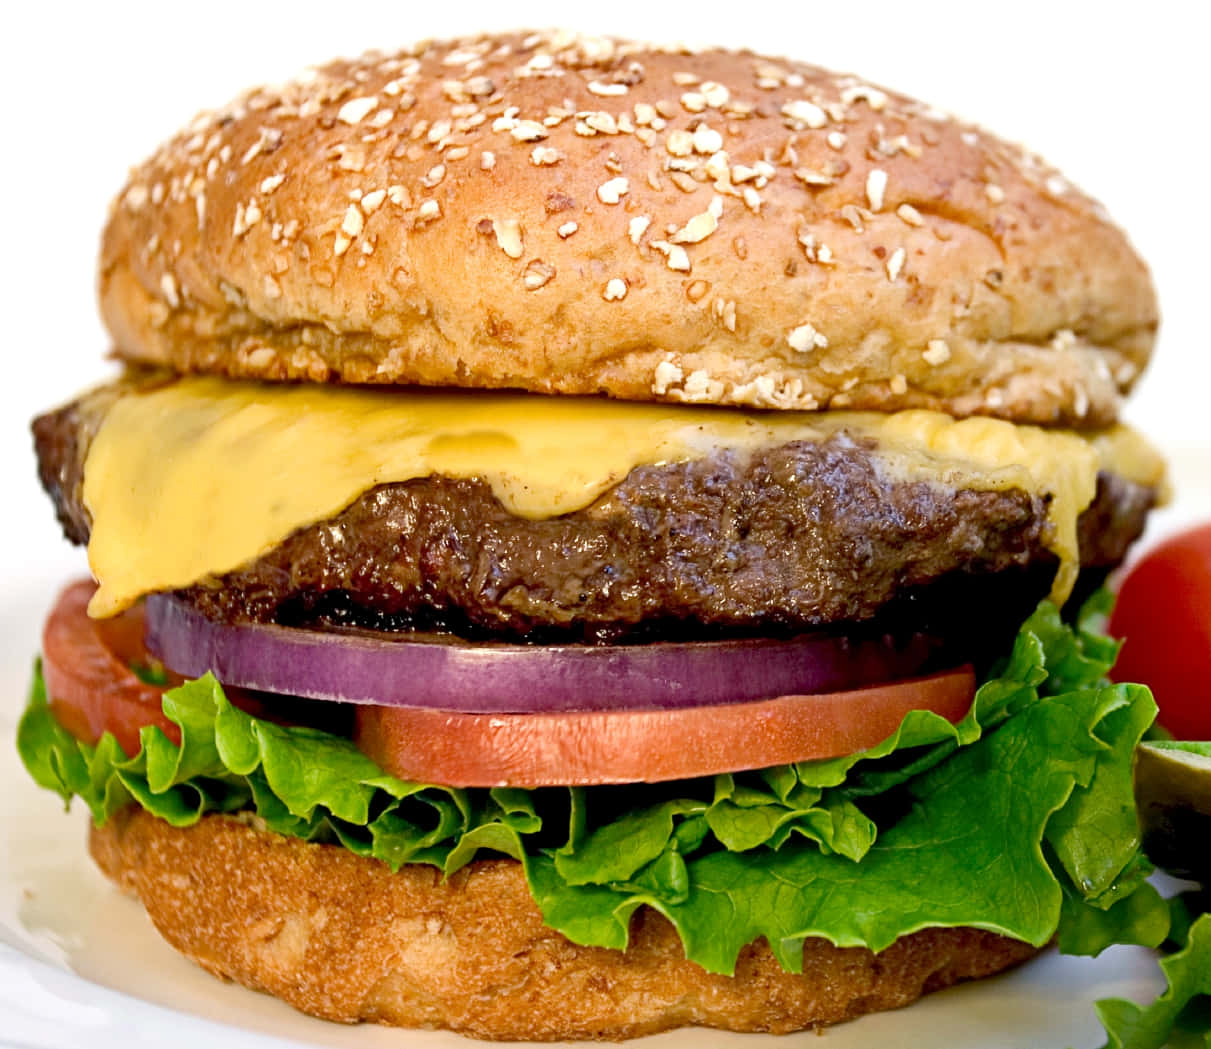 'The perfect hamburger - Freshly cooked to perfection!'